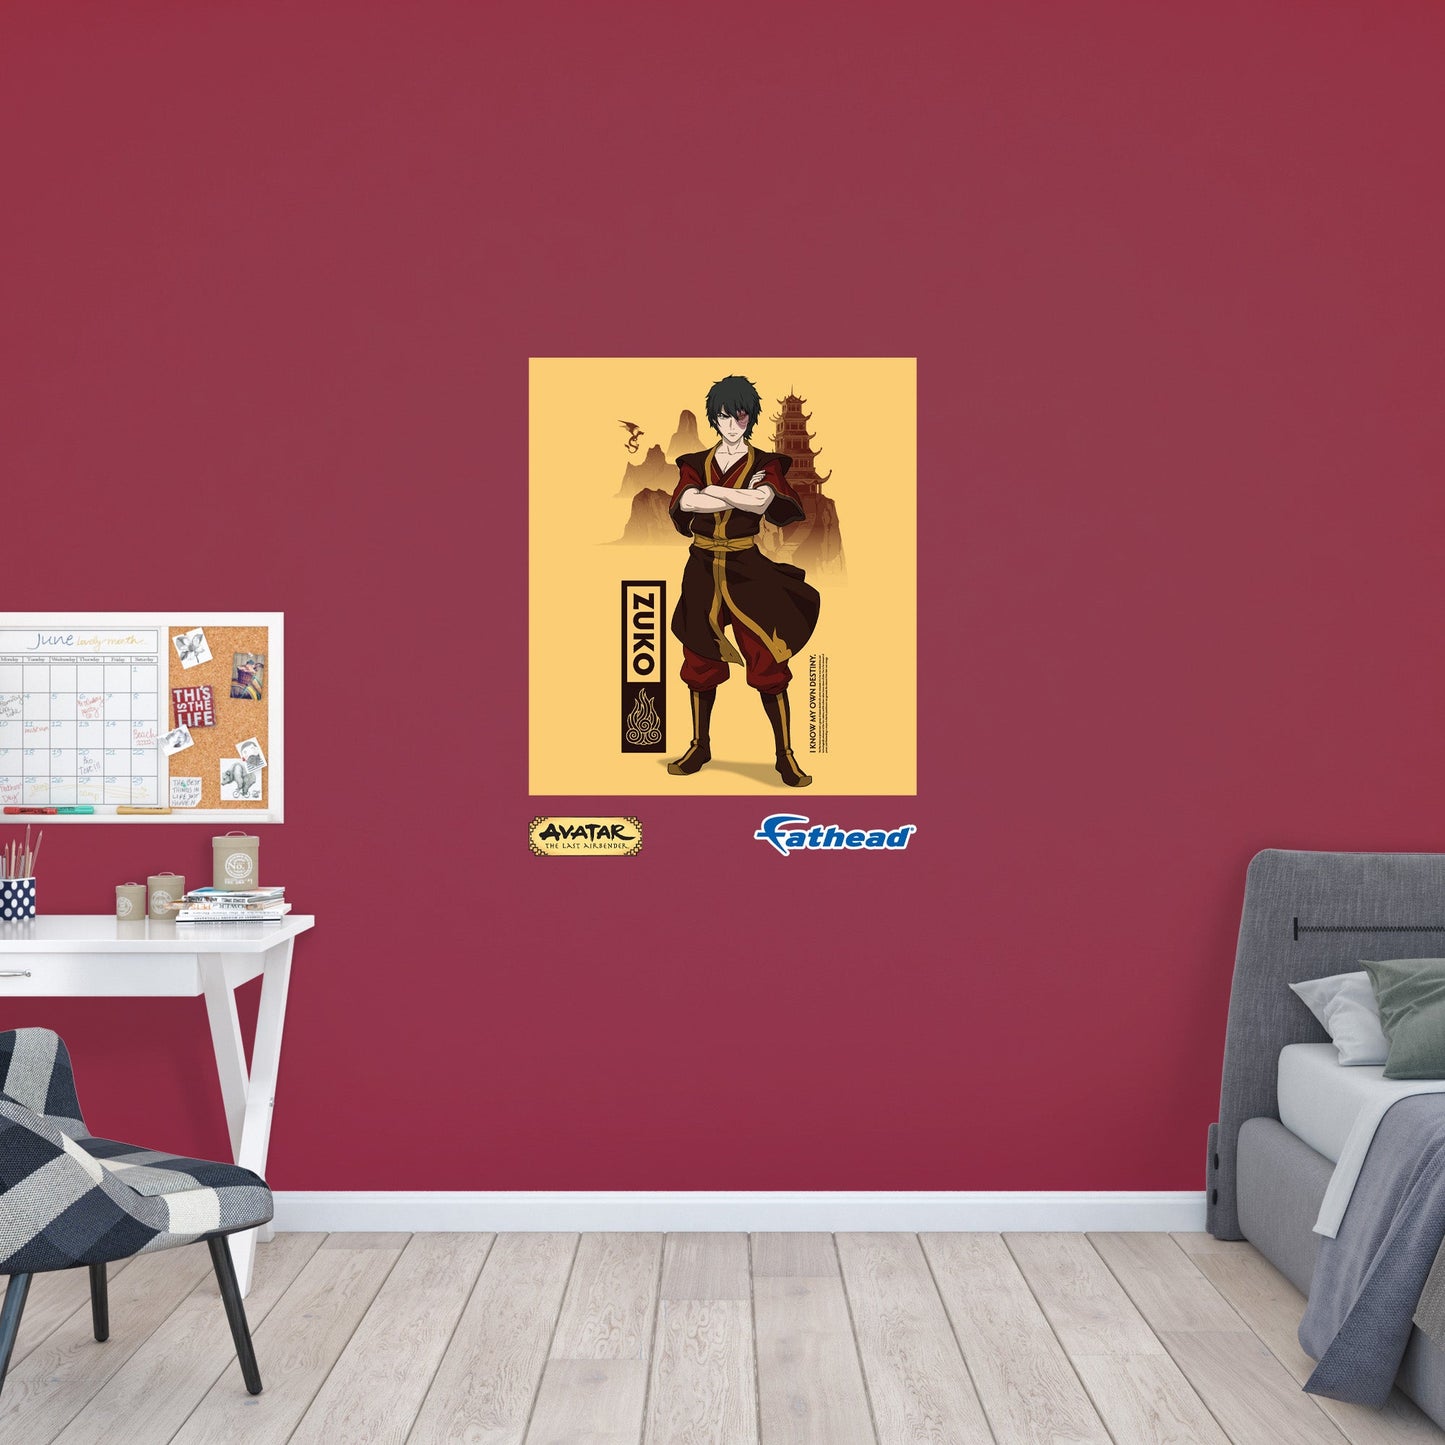 Avatar The Last Airbender: I Know My Own Destiny Poster - Officially Licensed Nickelodeon Removable Adhesive Decal